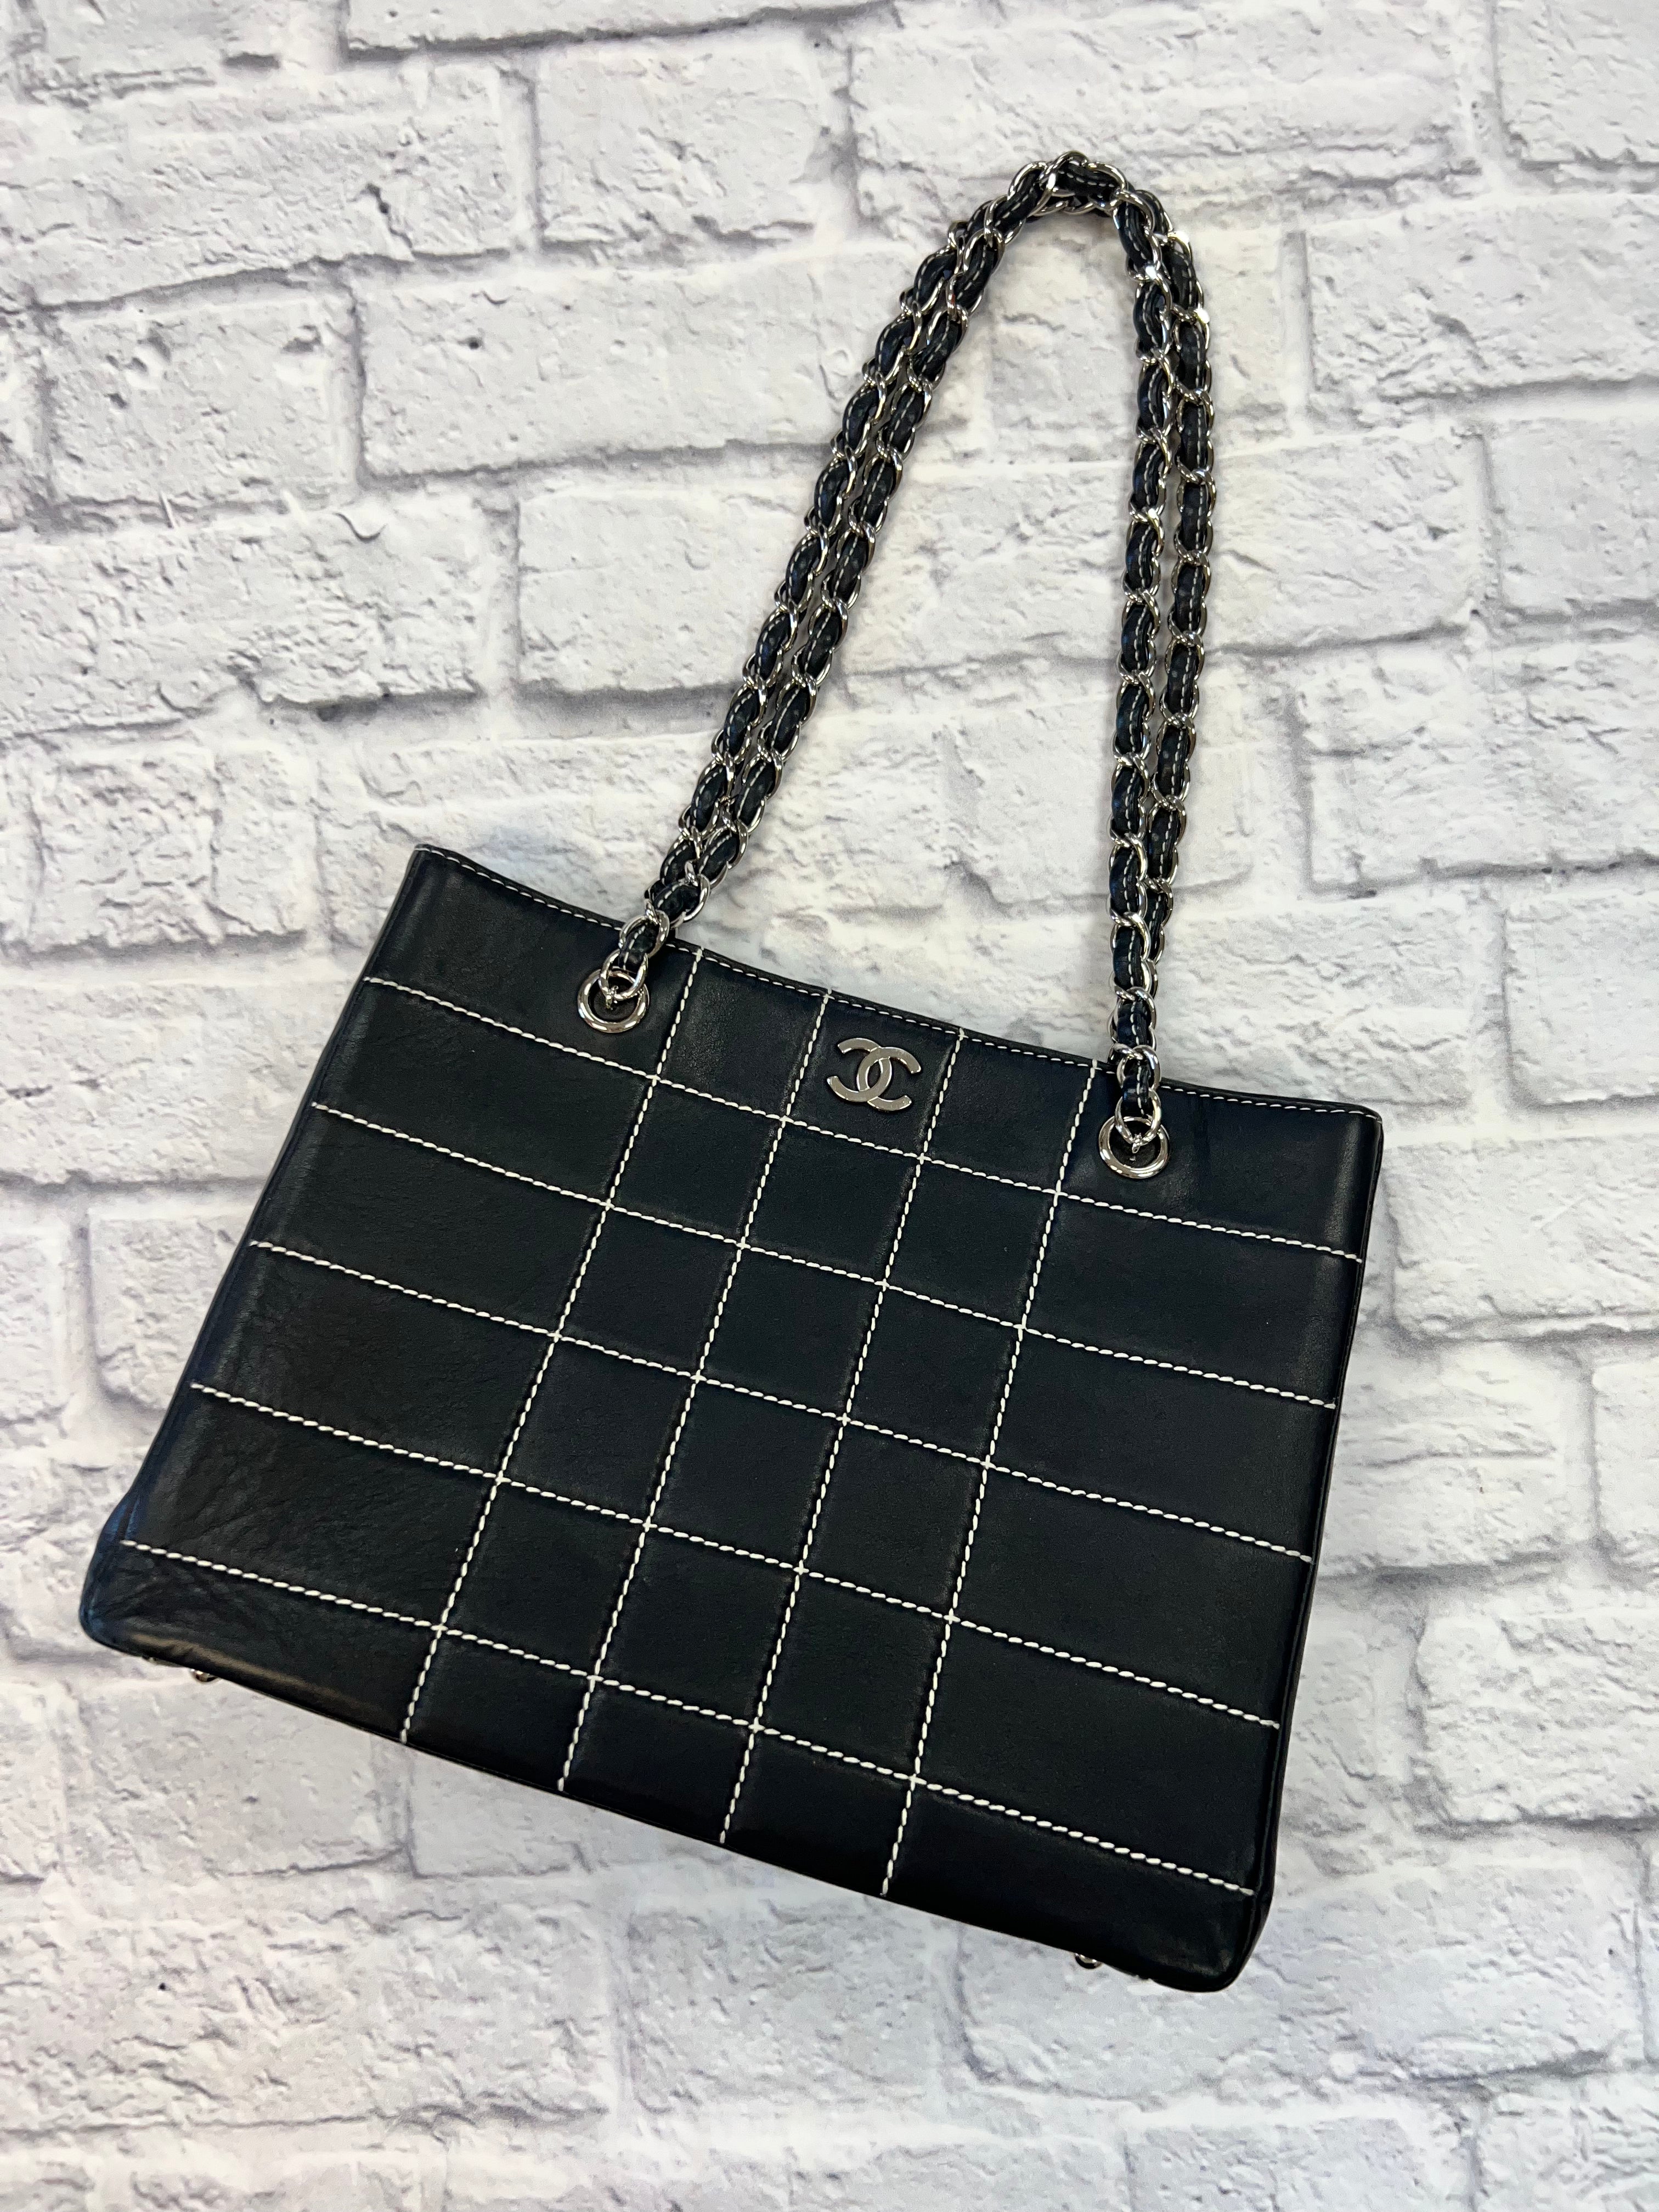 Chanel Black white stitched Tote – The Stock Room NJ